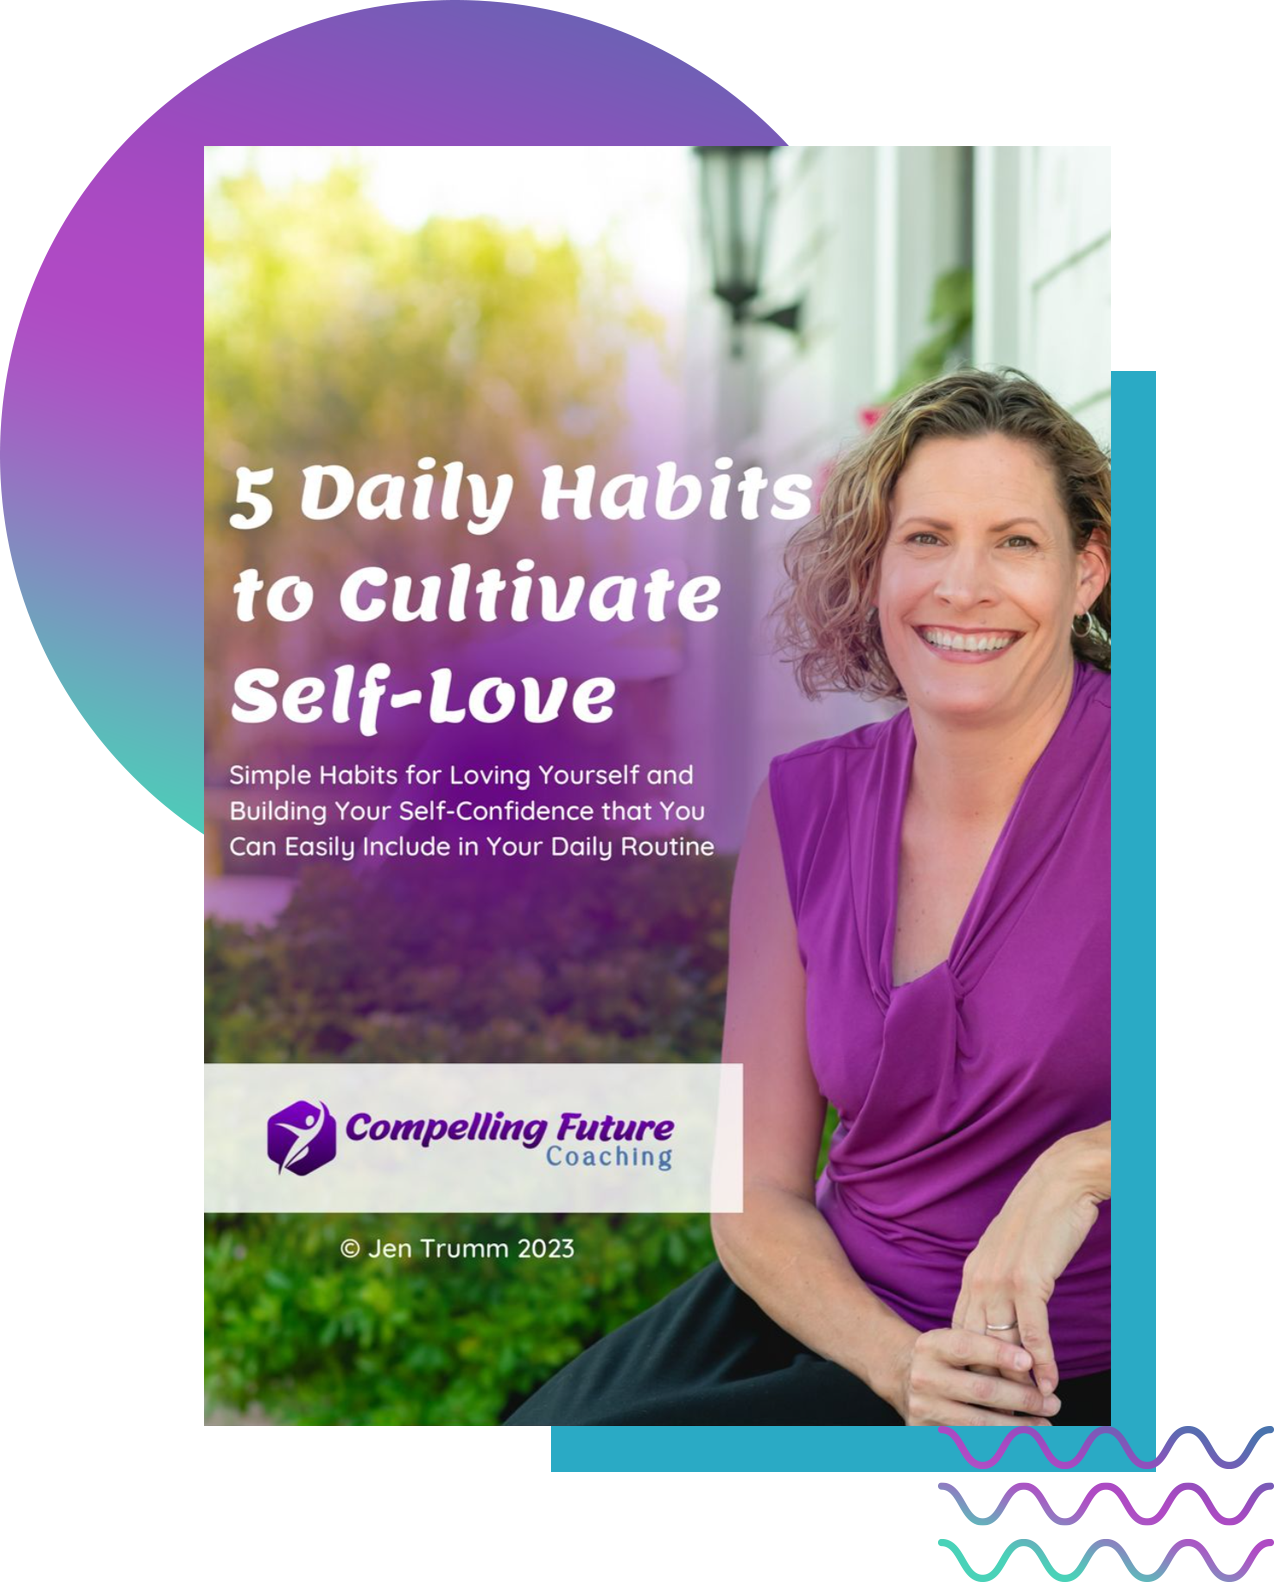 BOOK 5 Daily Habits to Cultivate Self-Love